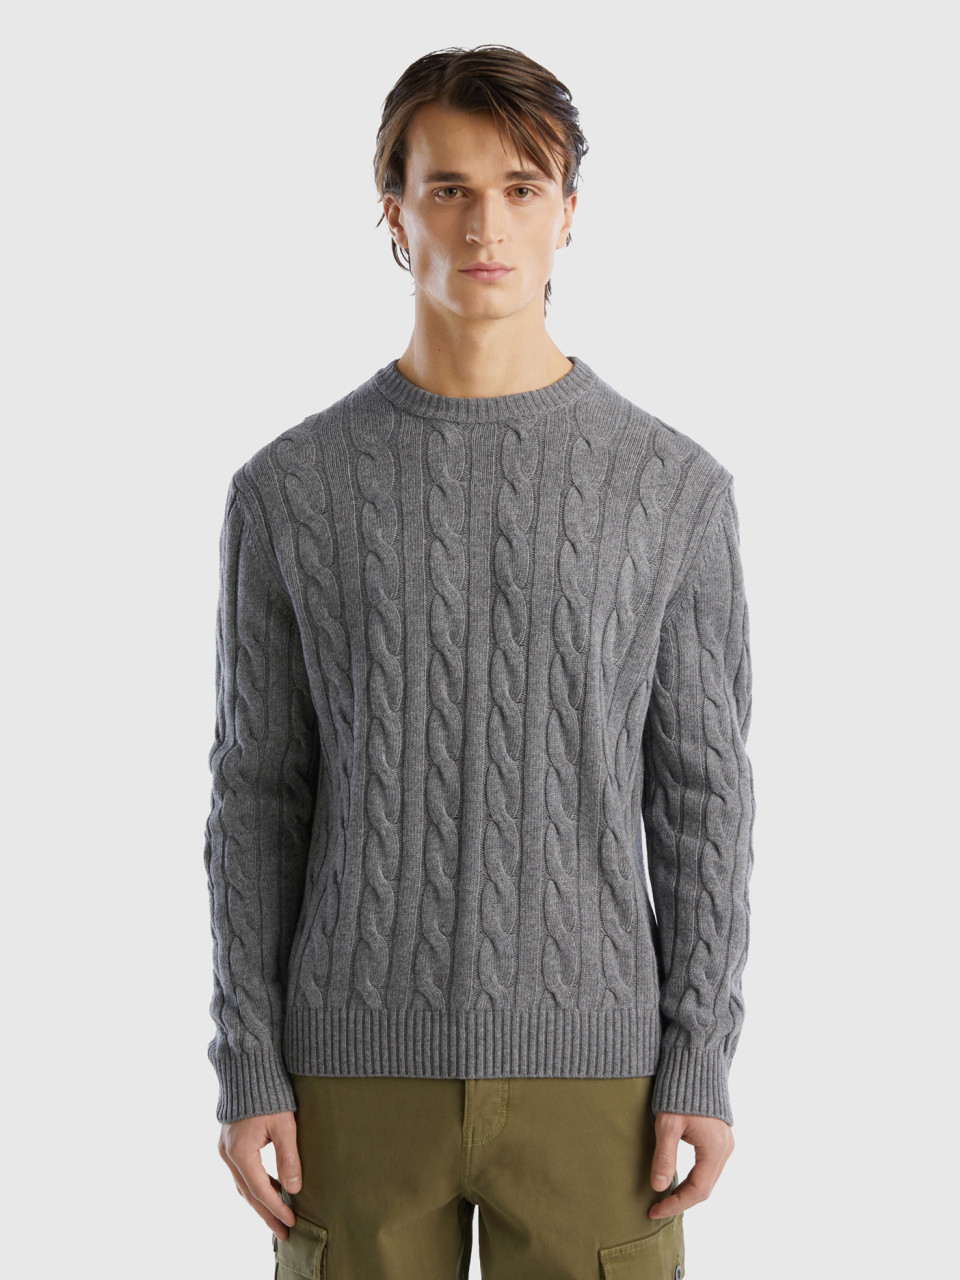 Benetton, Cable Knit Sweater In Cashmere Blend, Gray, Men